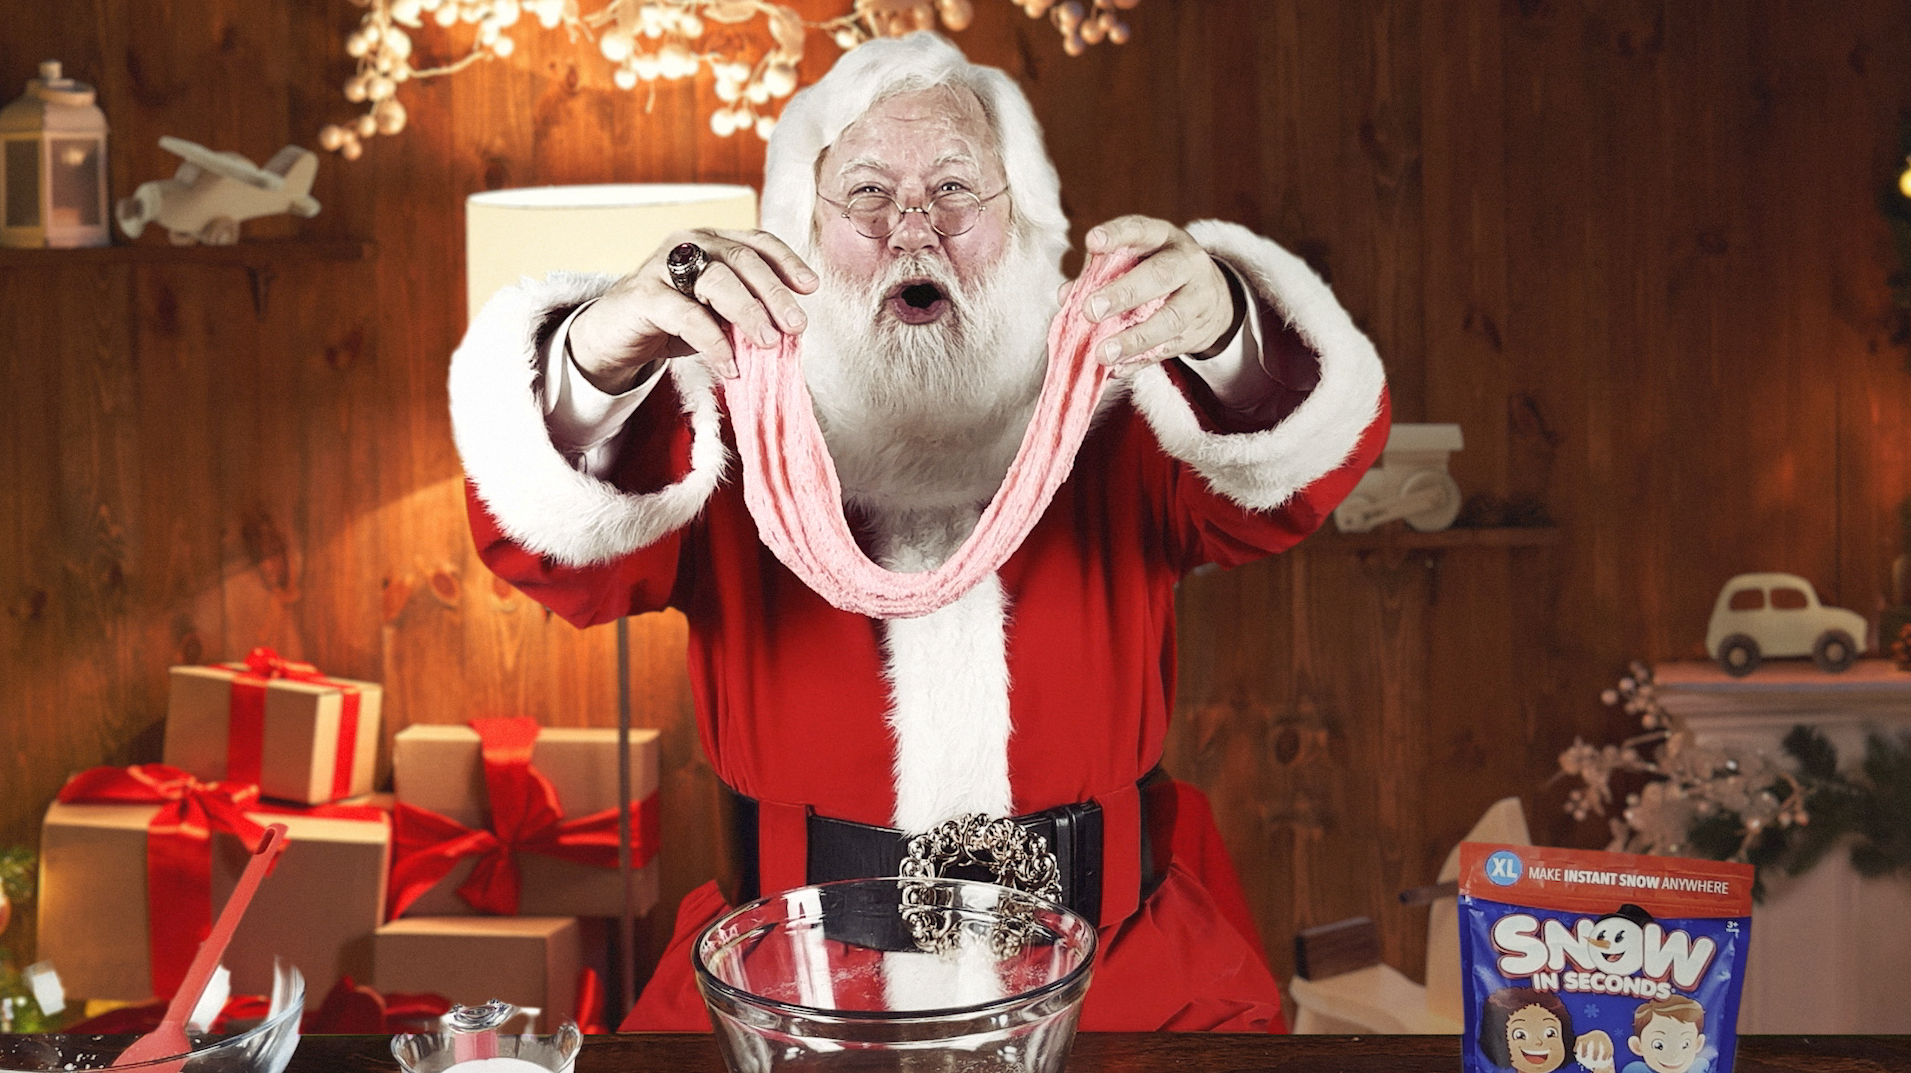 Cloud Slime with Snow in Seconds and Santa